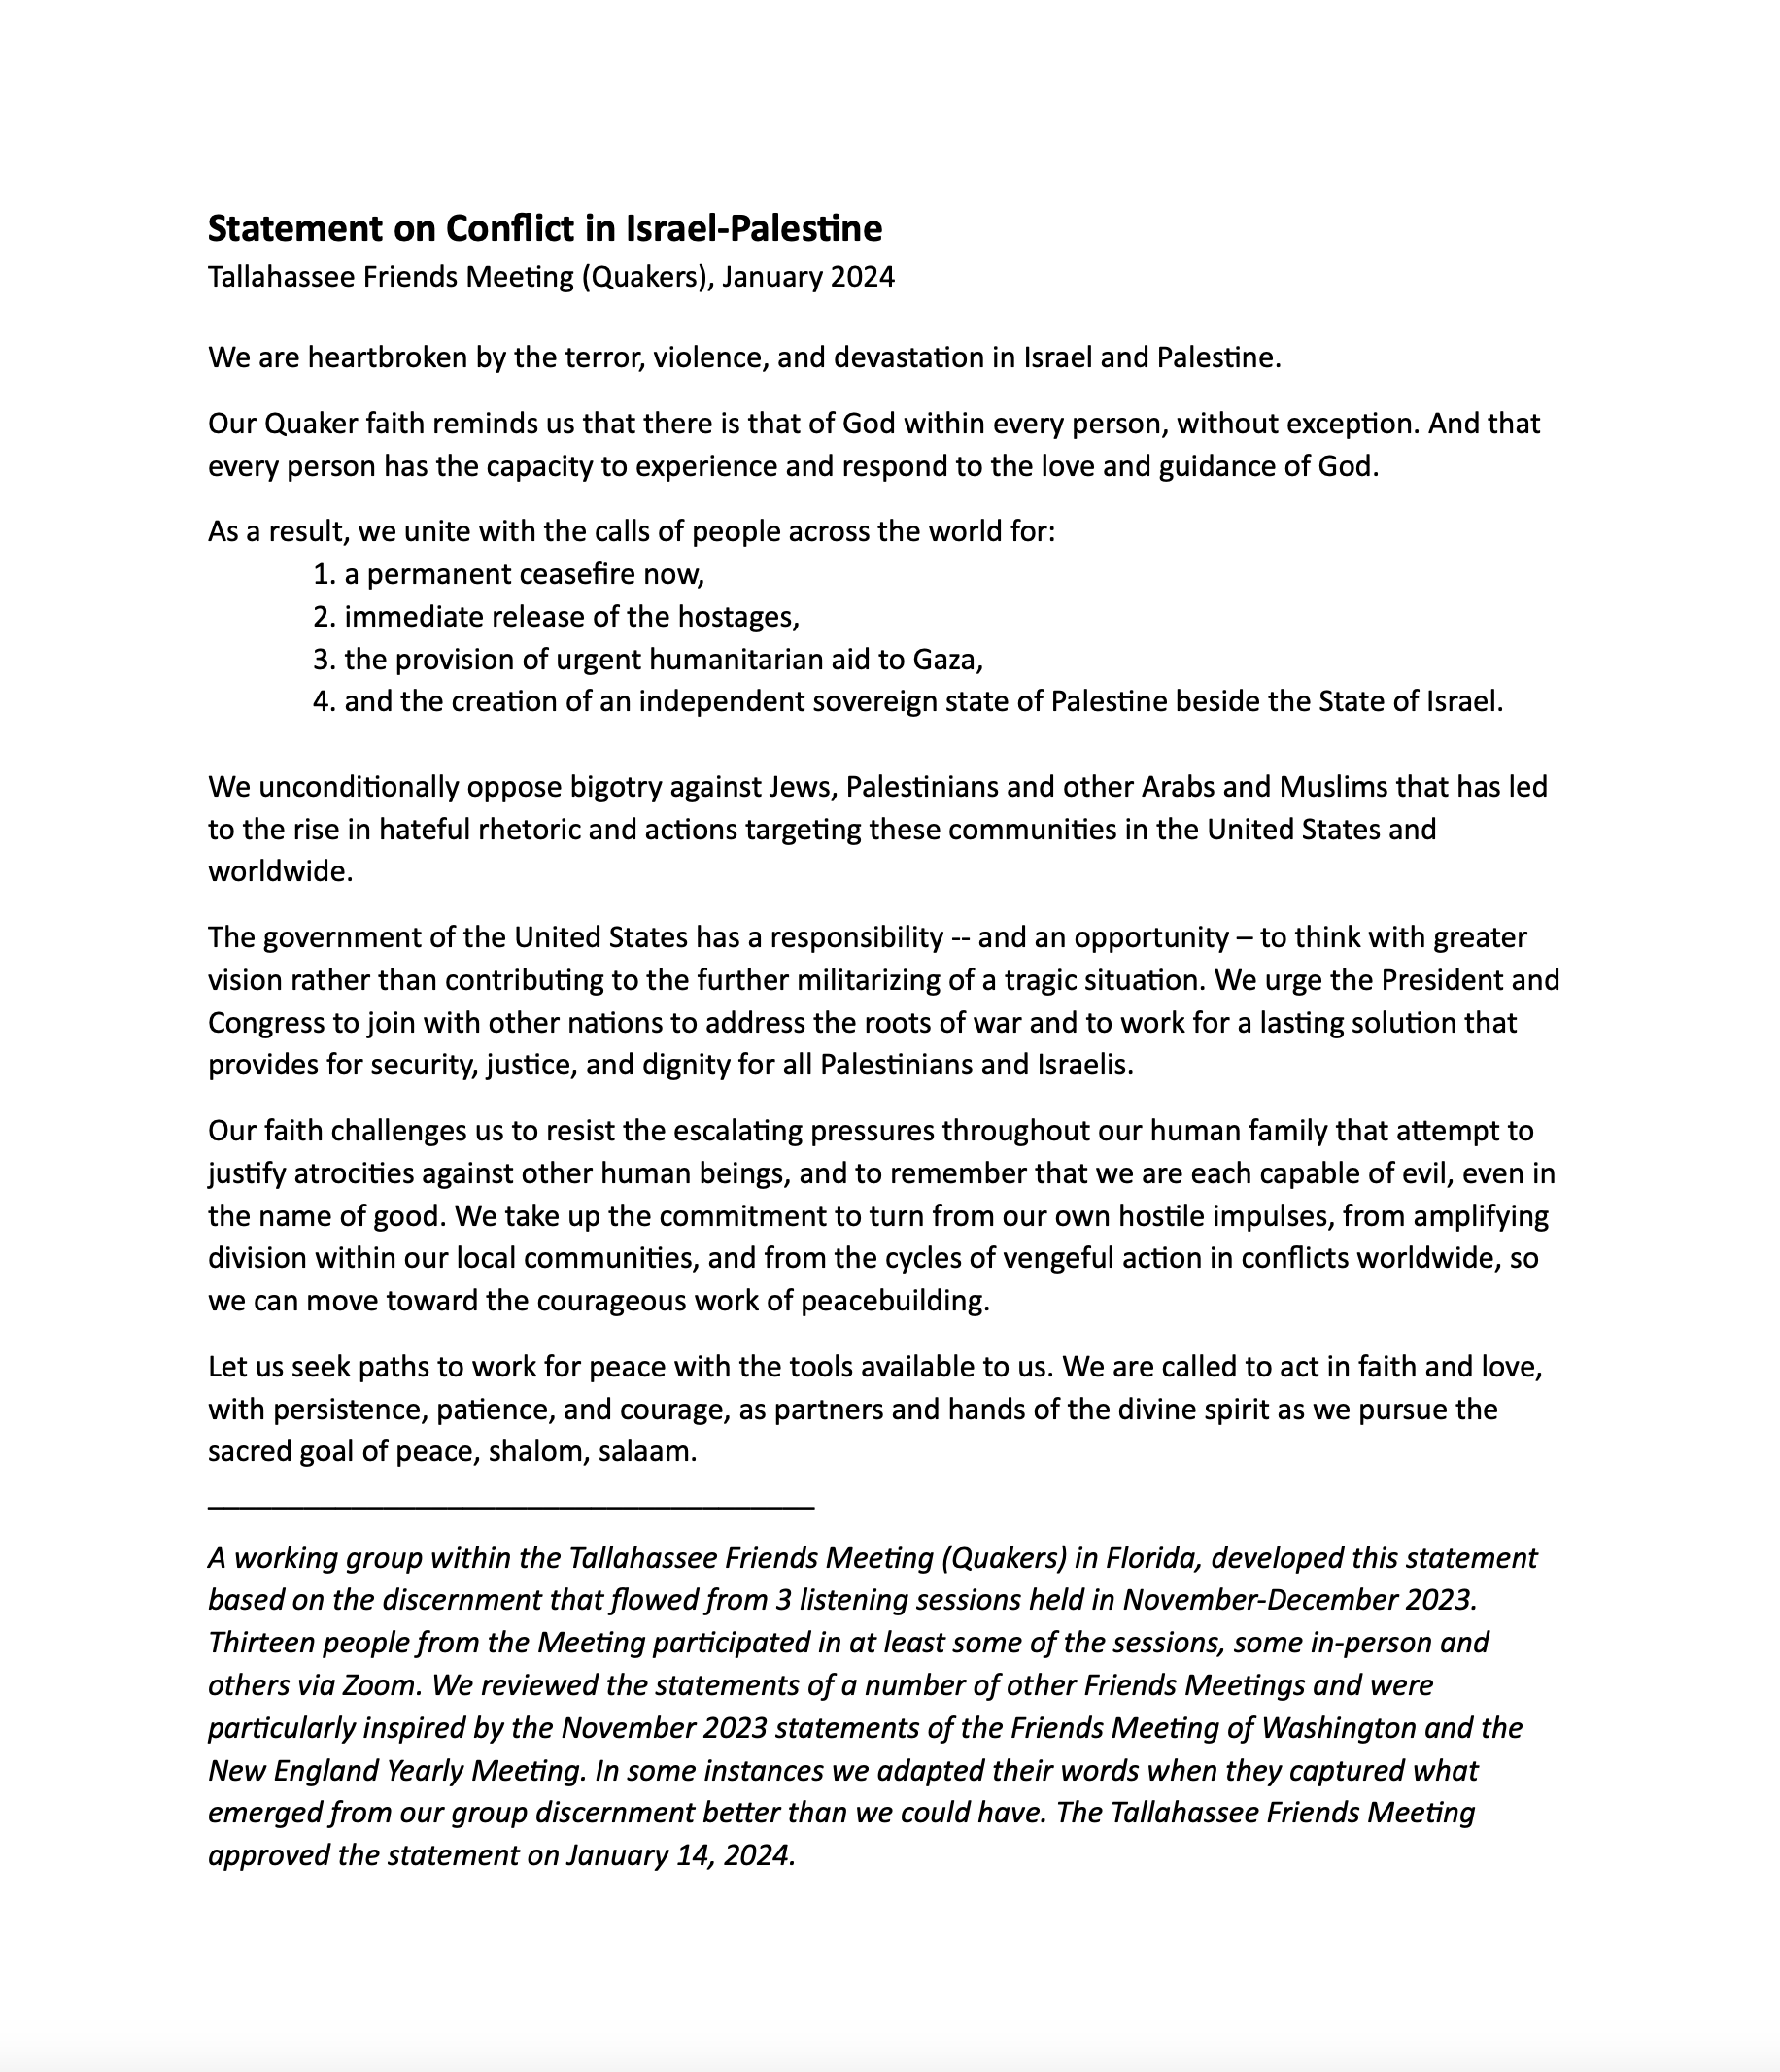 Statement on Conflict in Israel-Palestine